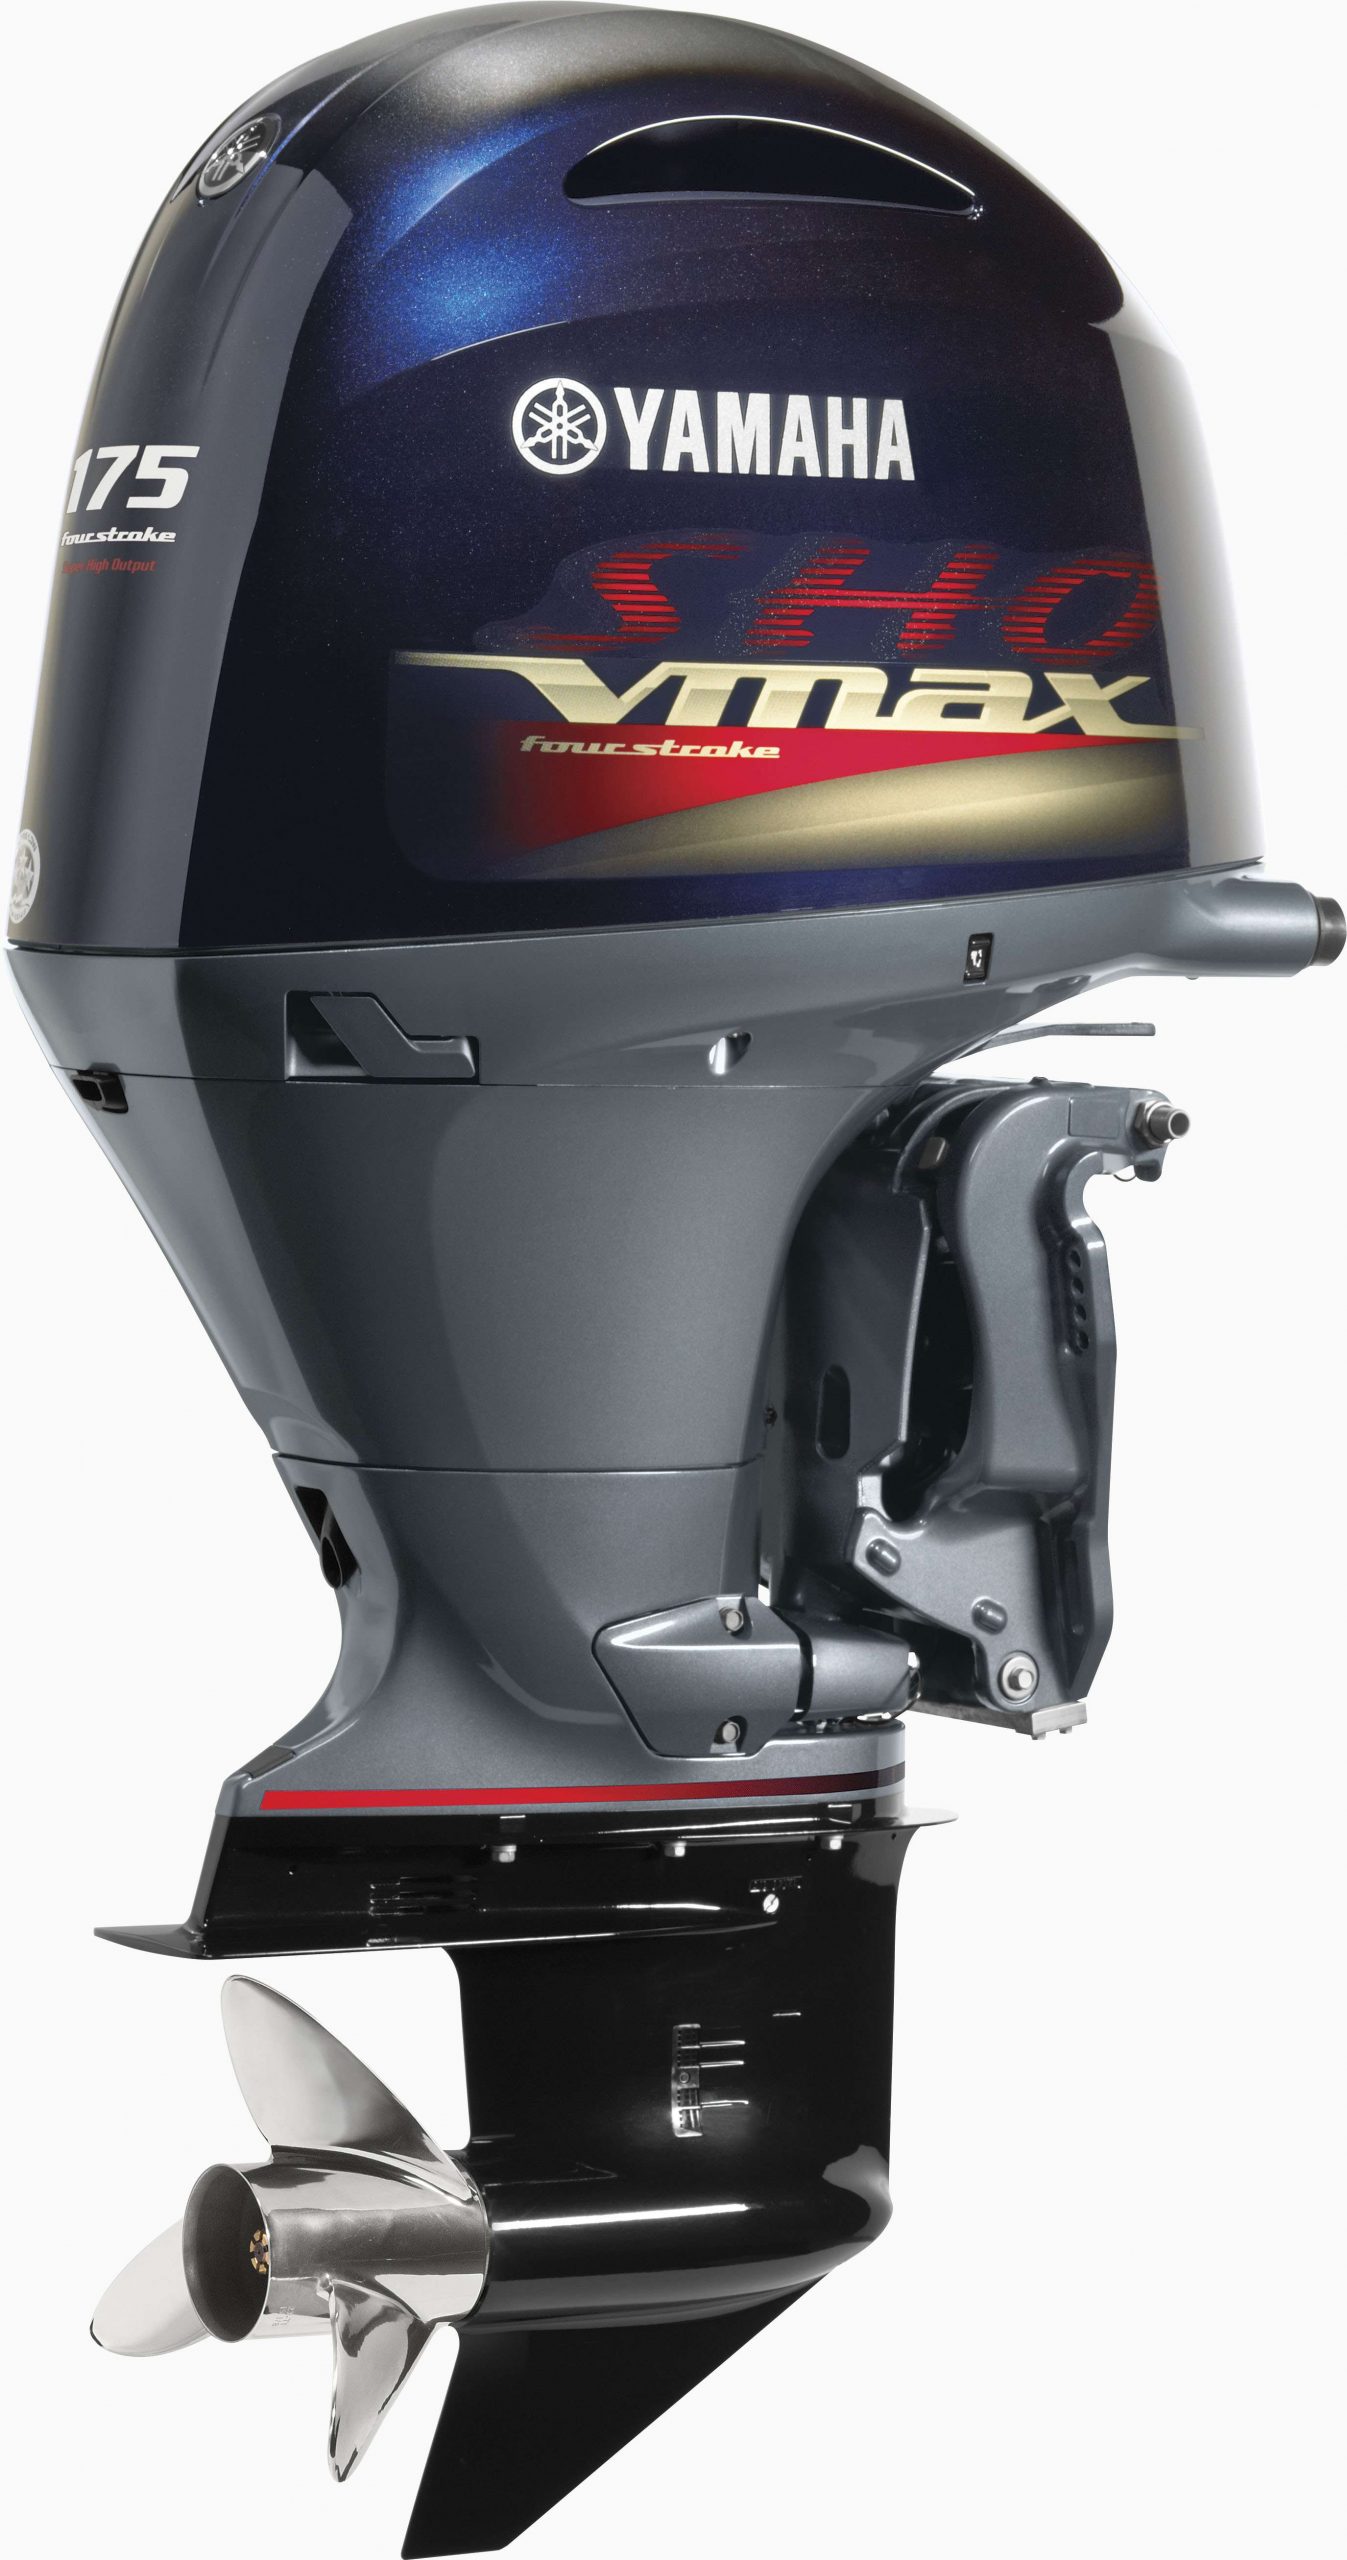 <B>YAMAHA VMAX SHO</b>
Available in 115- and 175-horsepower models, this 2.8-liter 4-stroke offers clean, quiet performance with good Â­throttle response in low- to mid-rpm ranges. The 115 provides smaller boats with the same SHO performance proven in the VMax 200, 225 and 250 models. The 175 fills a gap Â­between the 150 and 200, Â­offering anglers a powerful, yet economical, outboard for high-performance bass boats.